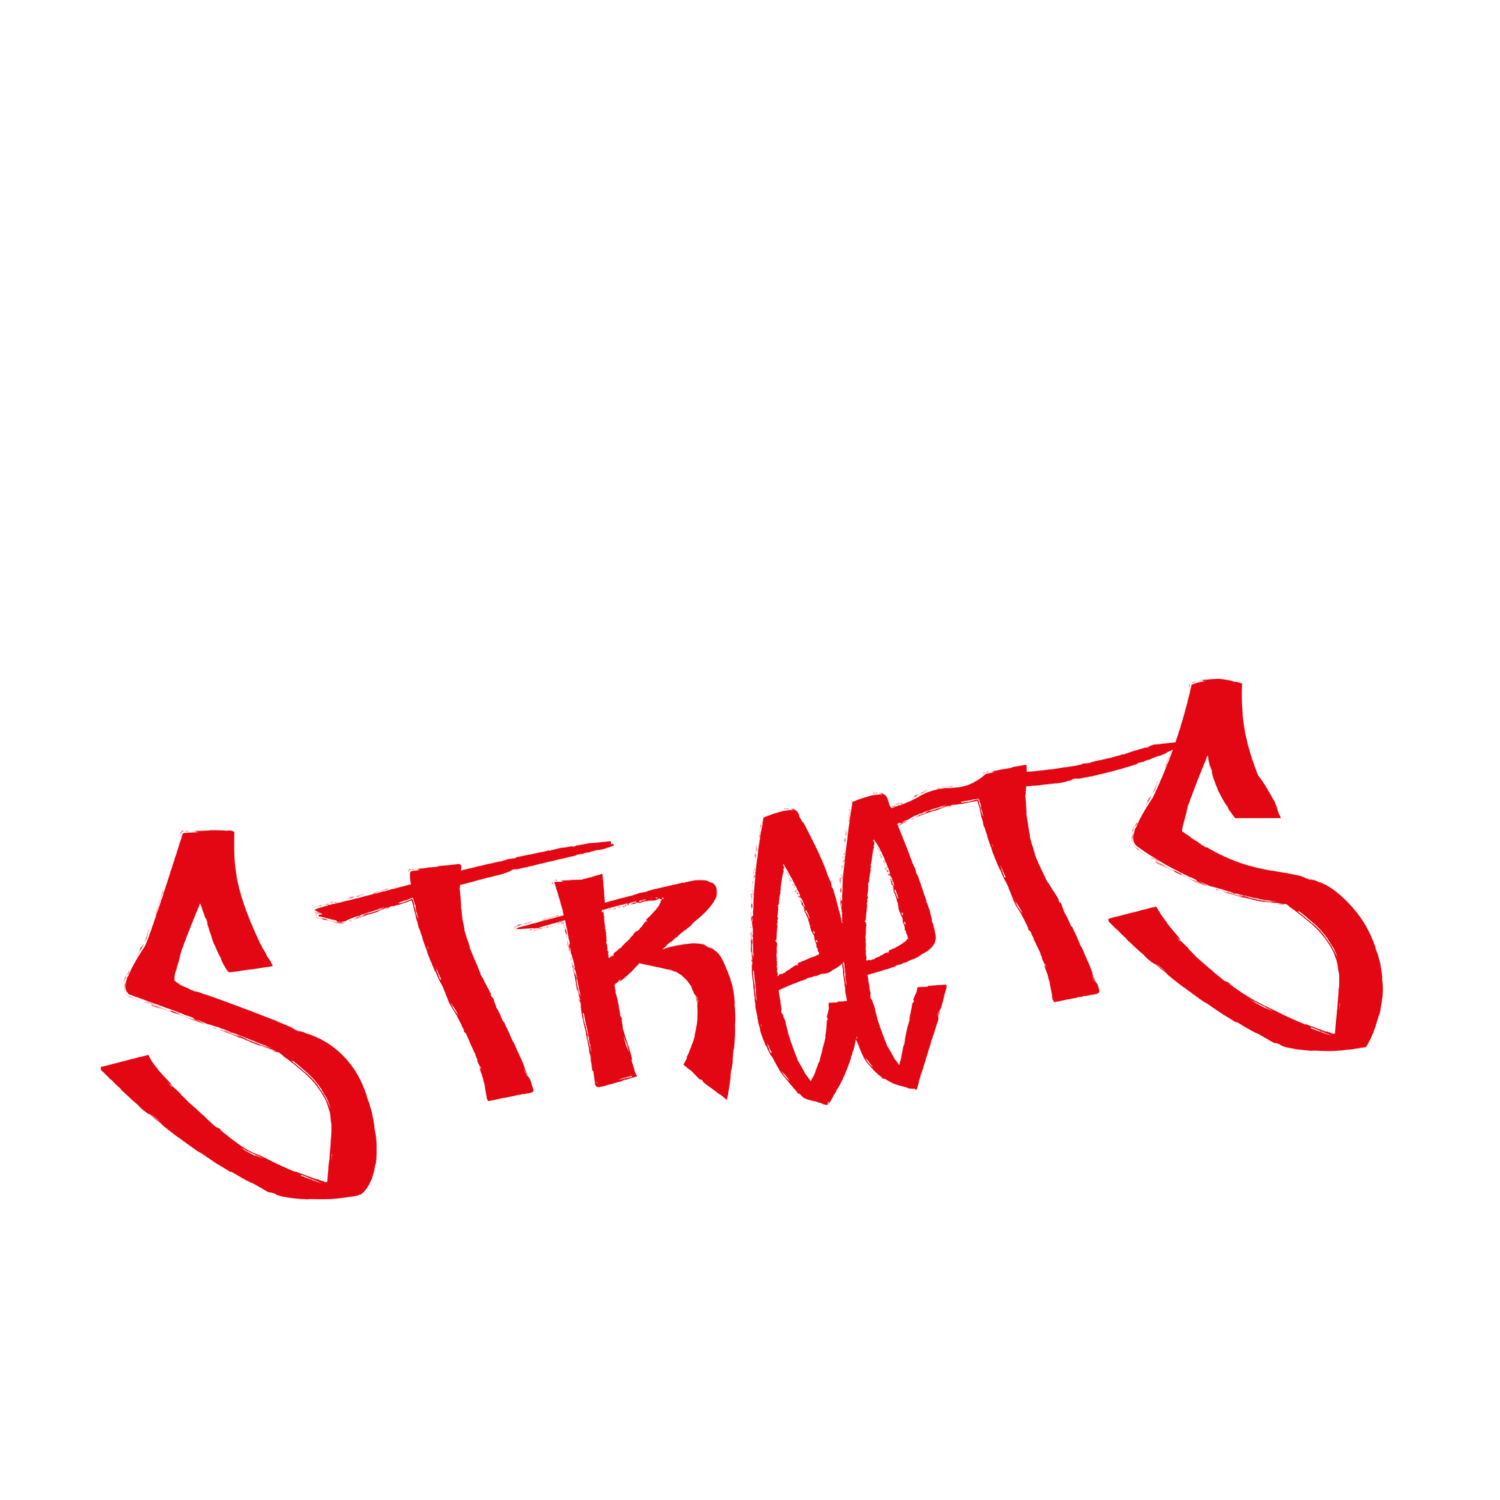 OFF THE STREETS